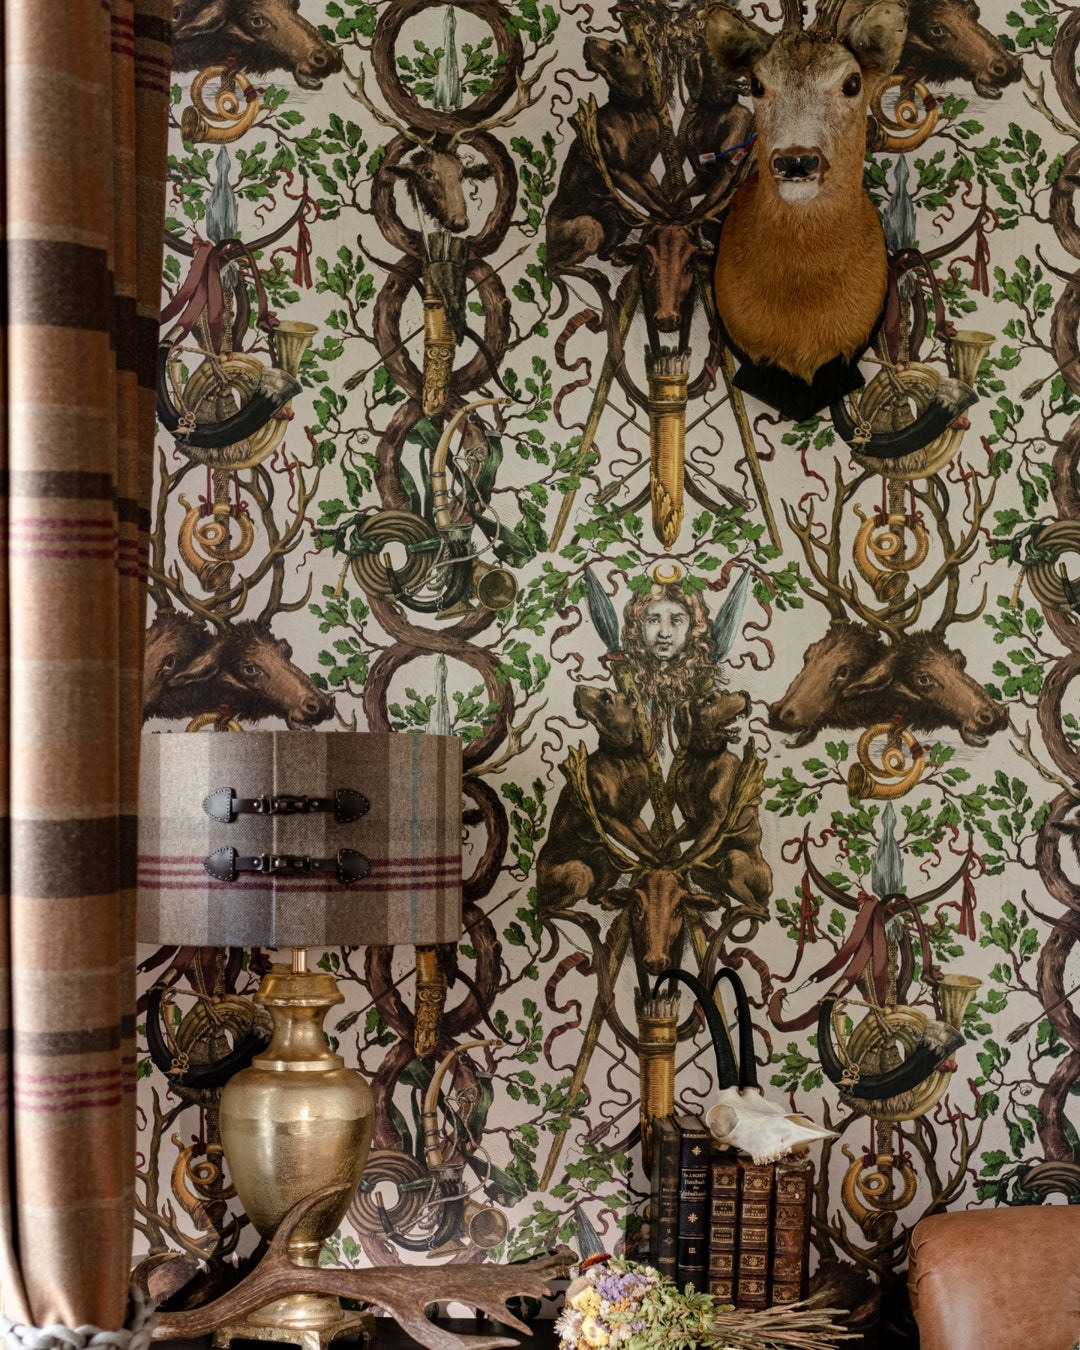 mind-the-gap-wallpaper-the-Ganghofer-hunt-lodge-style-pattern-boars-dogs-traditional-tapestry-print-vines-WP20690